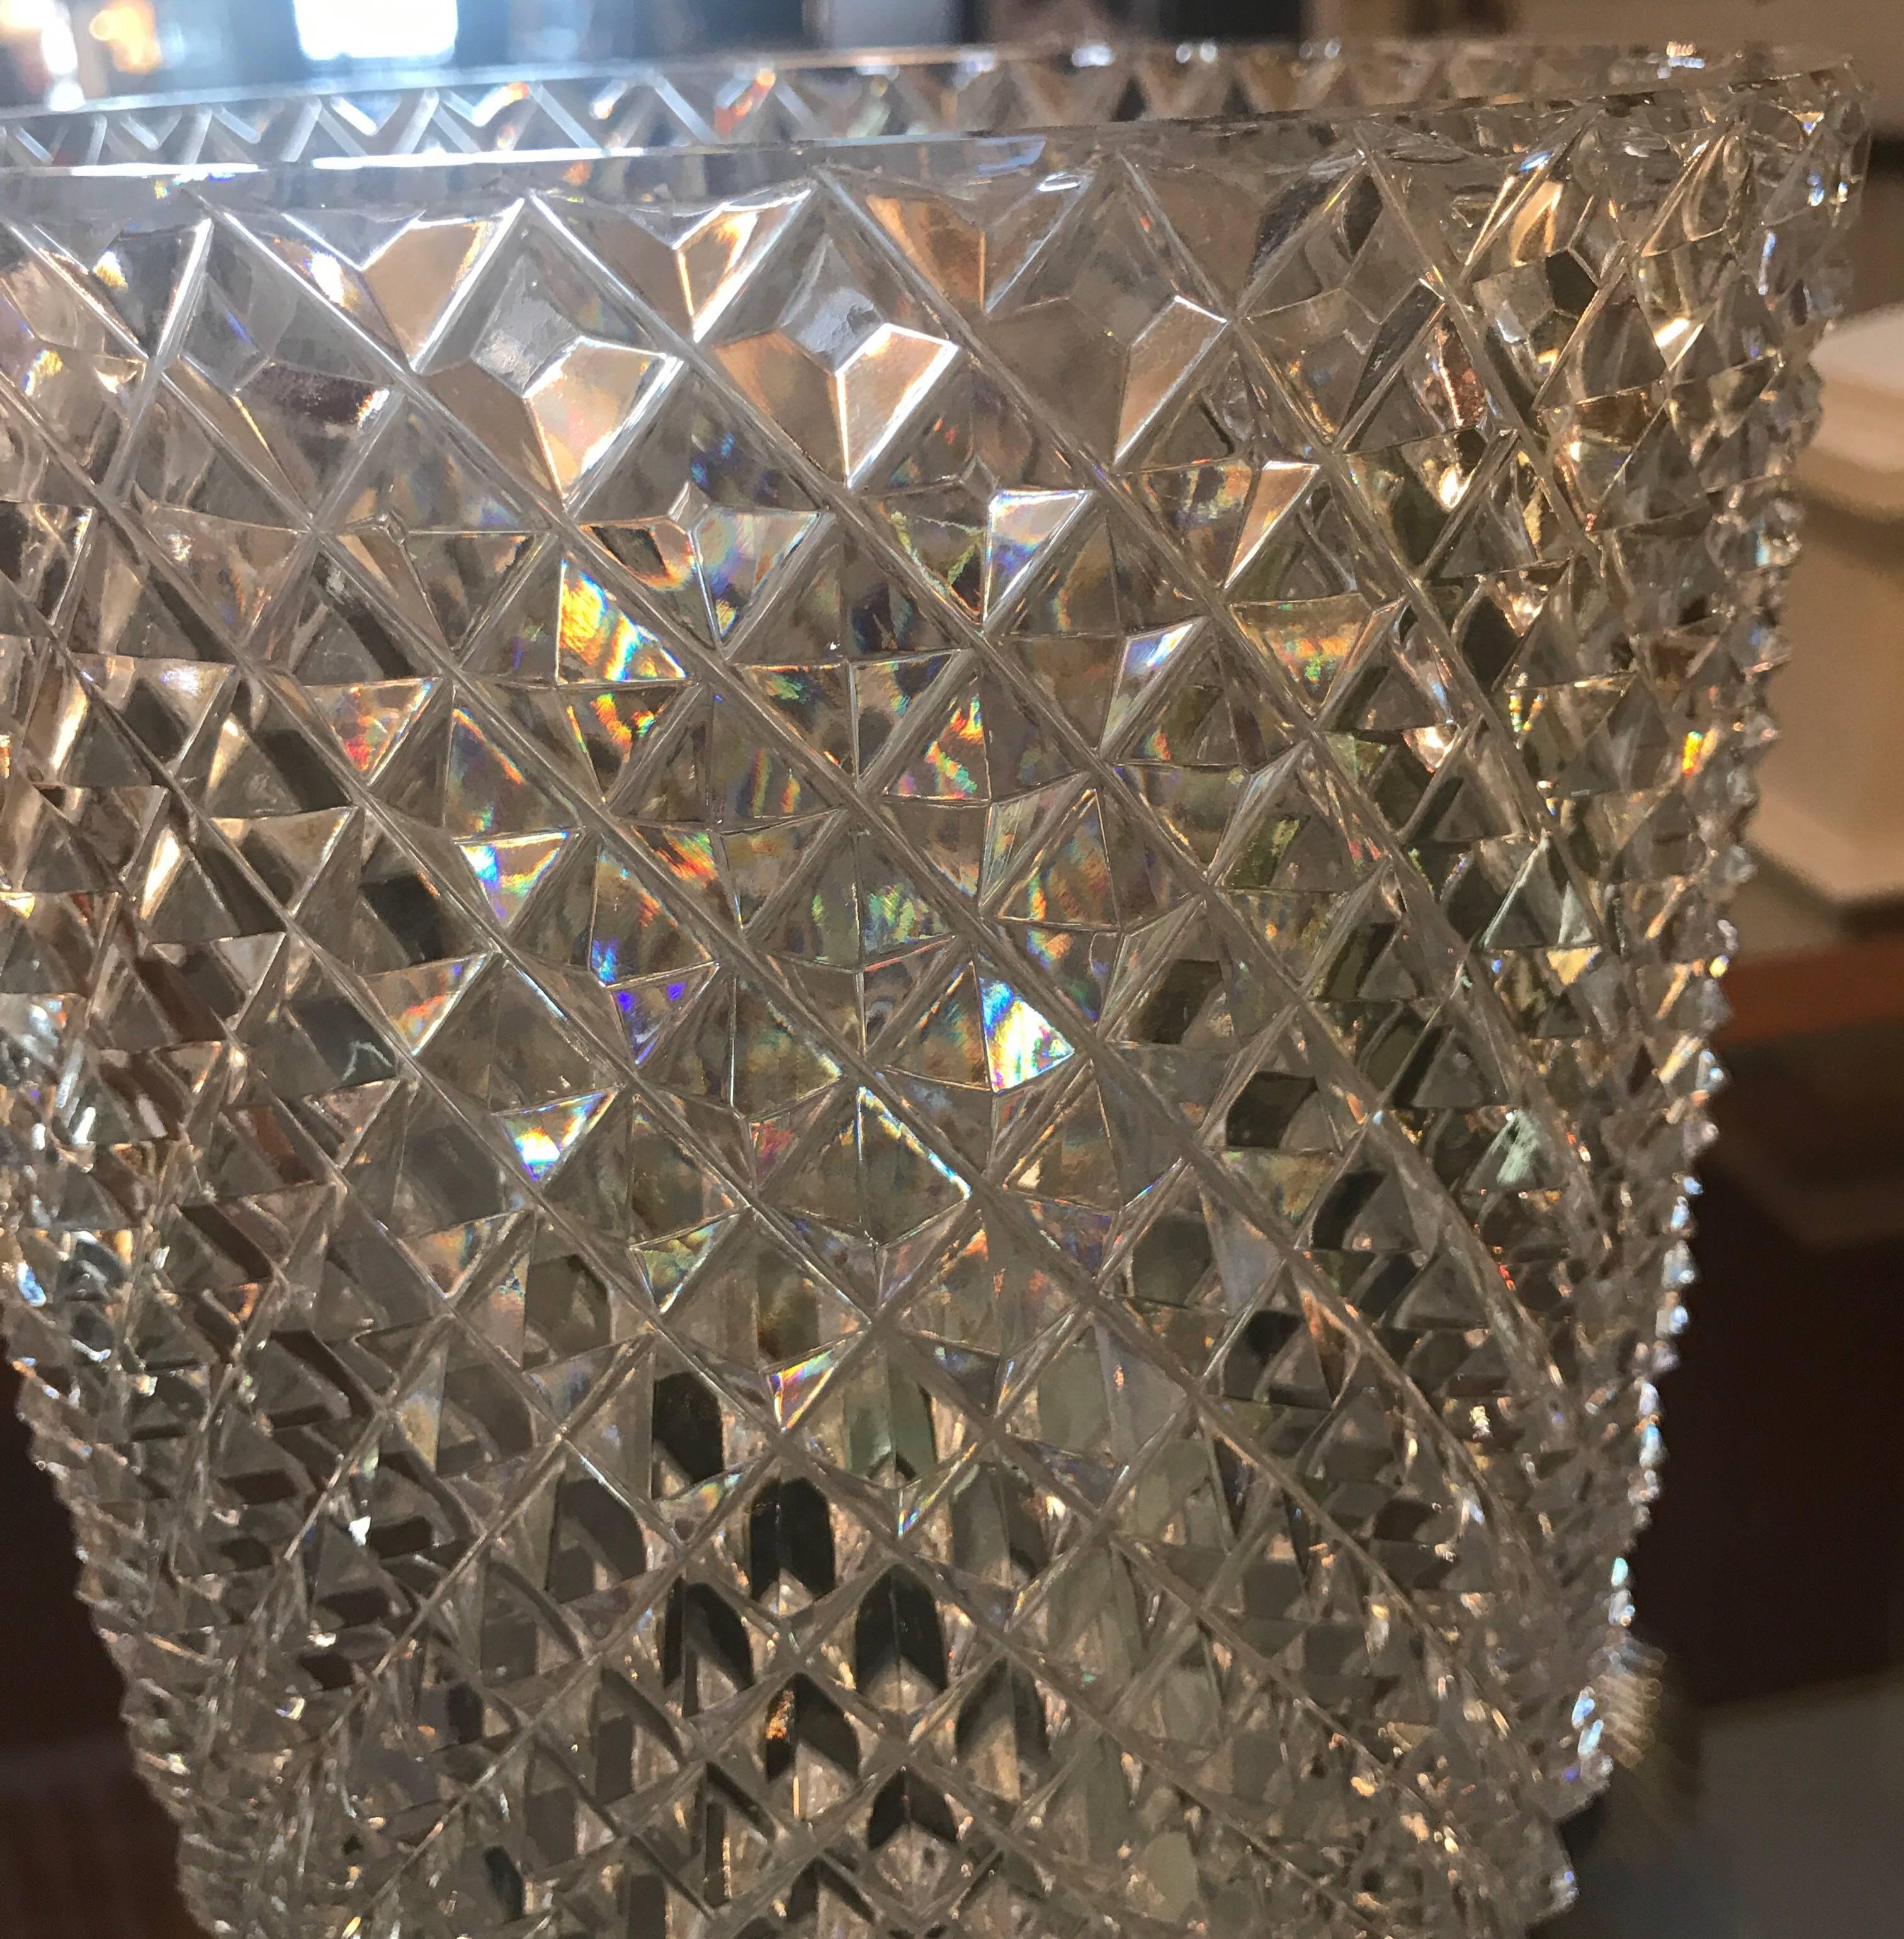 Substantial diamond cut flower vase. Beautiful all-over diamond pattern with starburst bottom. This vase is expertly cut and polished on a wheel, all by hand is a shimmering mirror finish glass. Very sharp and crisp cuts, perfectly symmetrical with